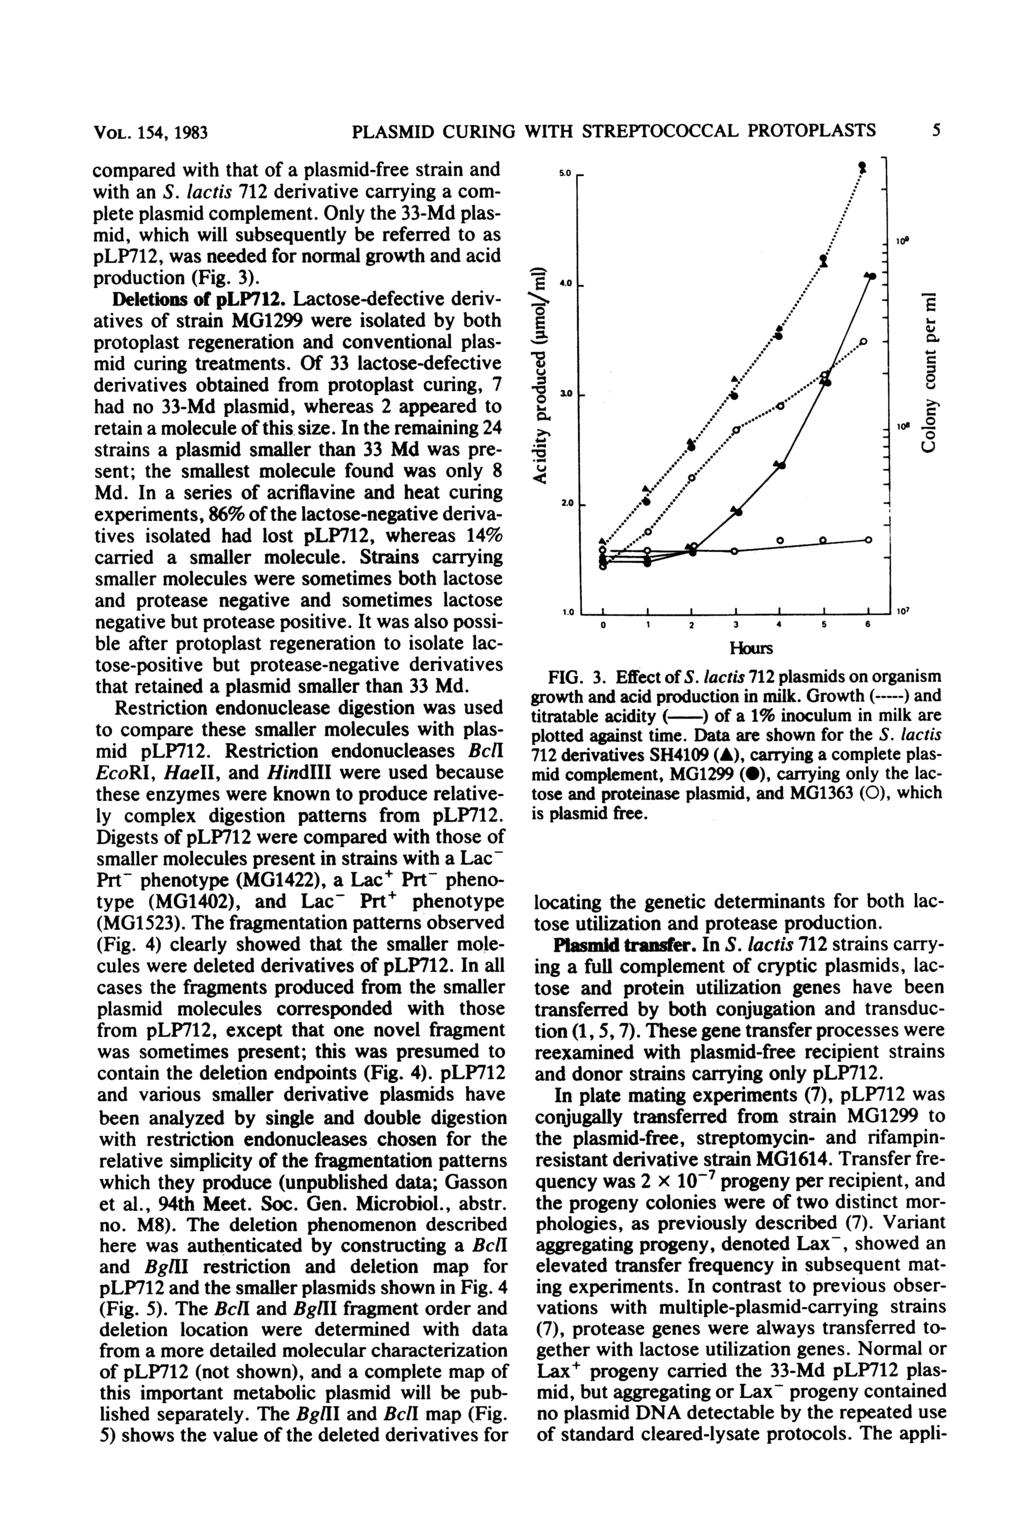 VOL. 154, 1983 PLASMID CURING WITH STREPTOCOCCAL PROTOPLASTS 5 compared with that of a plasmid-free strain and with an S. lactis 712 derivative carrying a complete plasmid complement.